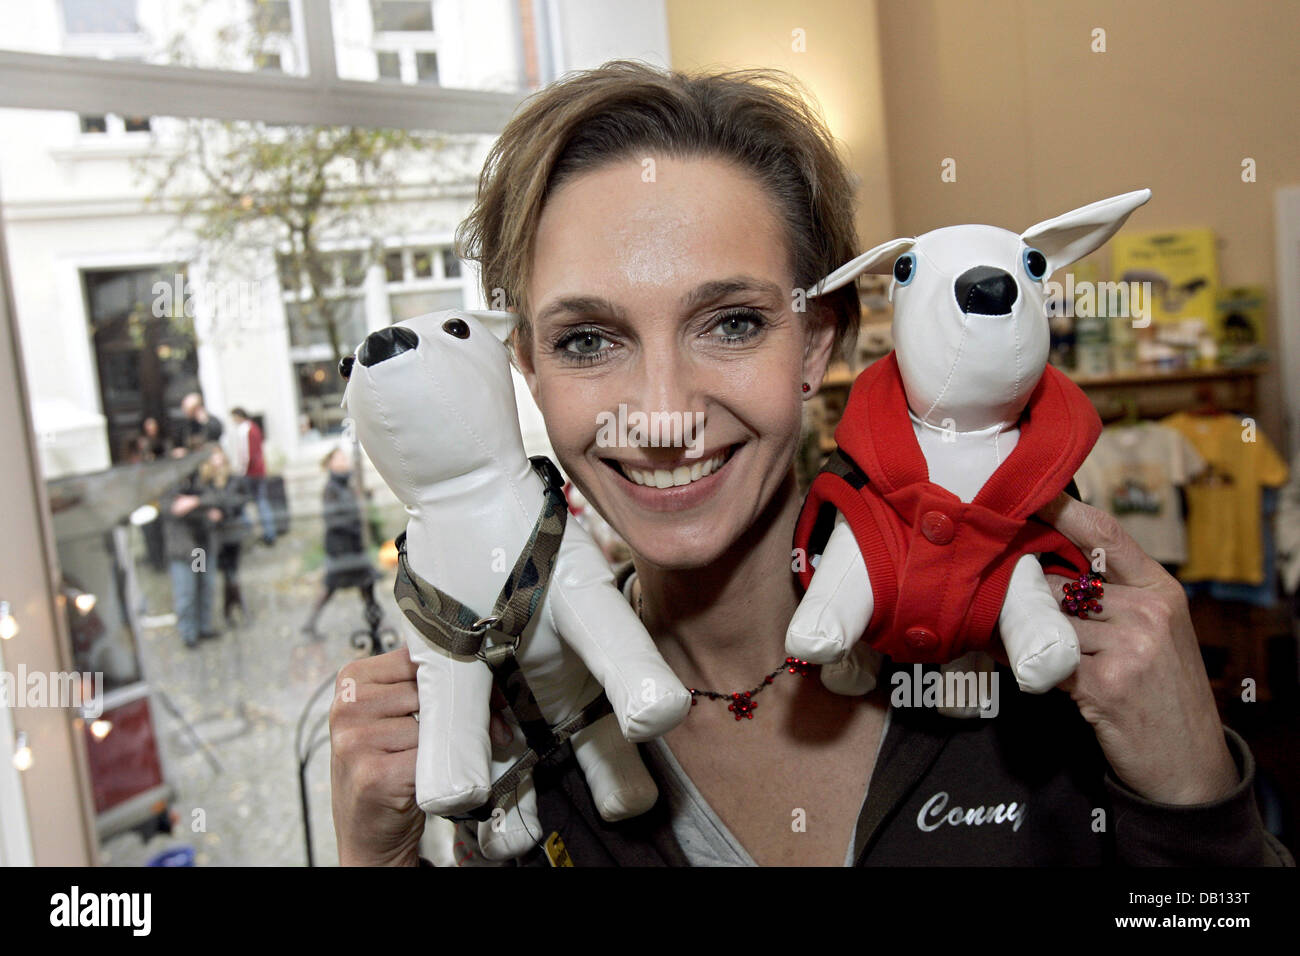 Actress Conny Niedrig poses with dog toys at the opening of her dog parlour in Essen, Germany, 28 October 2007. With the opening  of the shop a long entertained youth dream came true for Niedrig, who stars in the SAT1 serial ?Niedrig und Kuhnt?. Photo: Joerg Carstensen Stock Photo